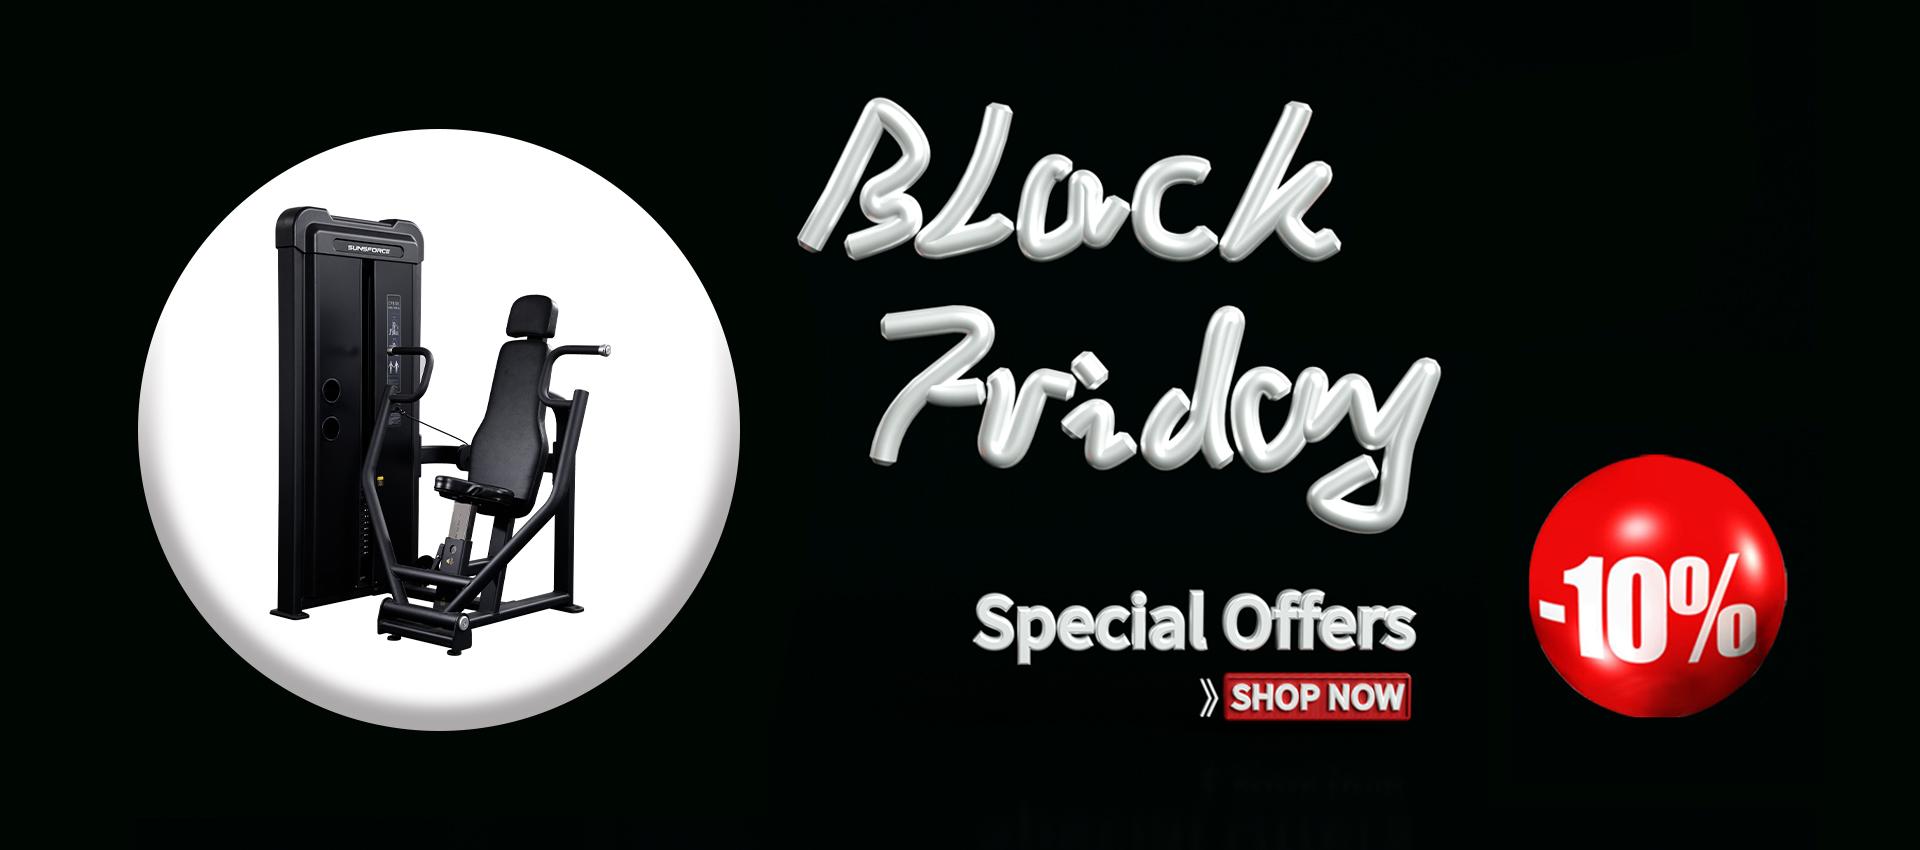 Our Biggest Ever Black Friday